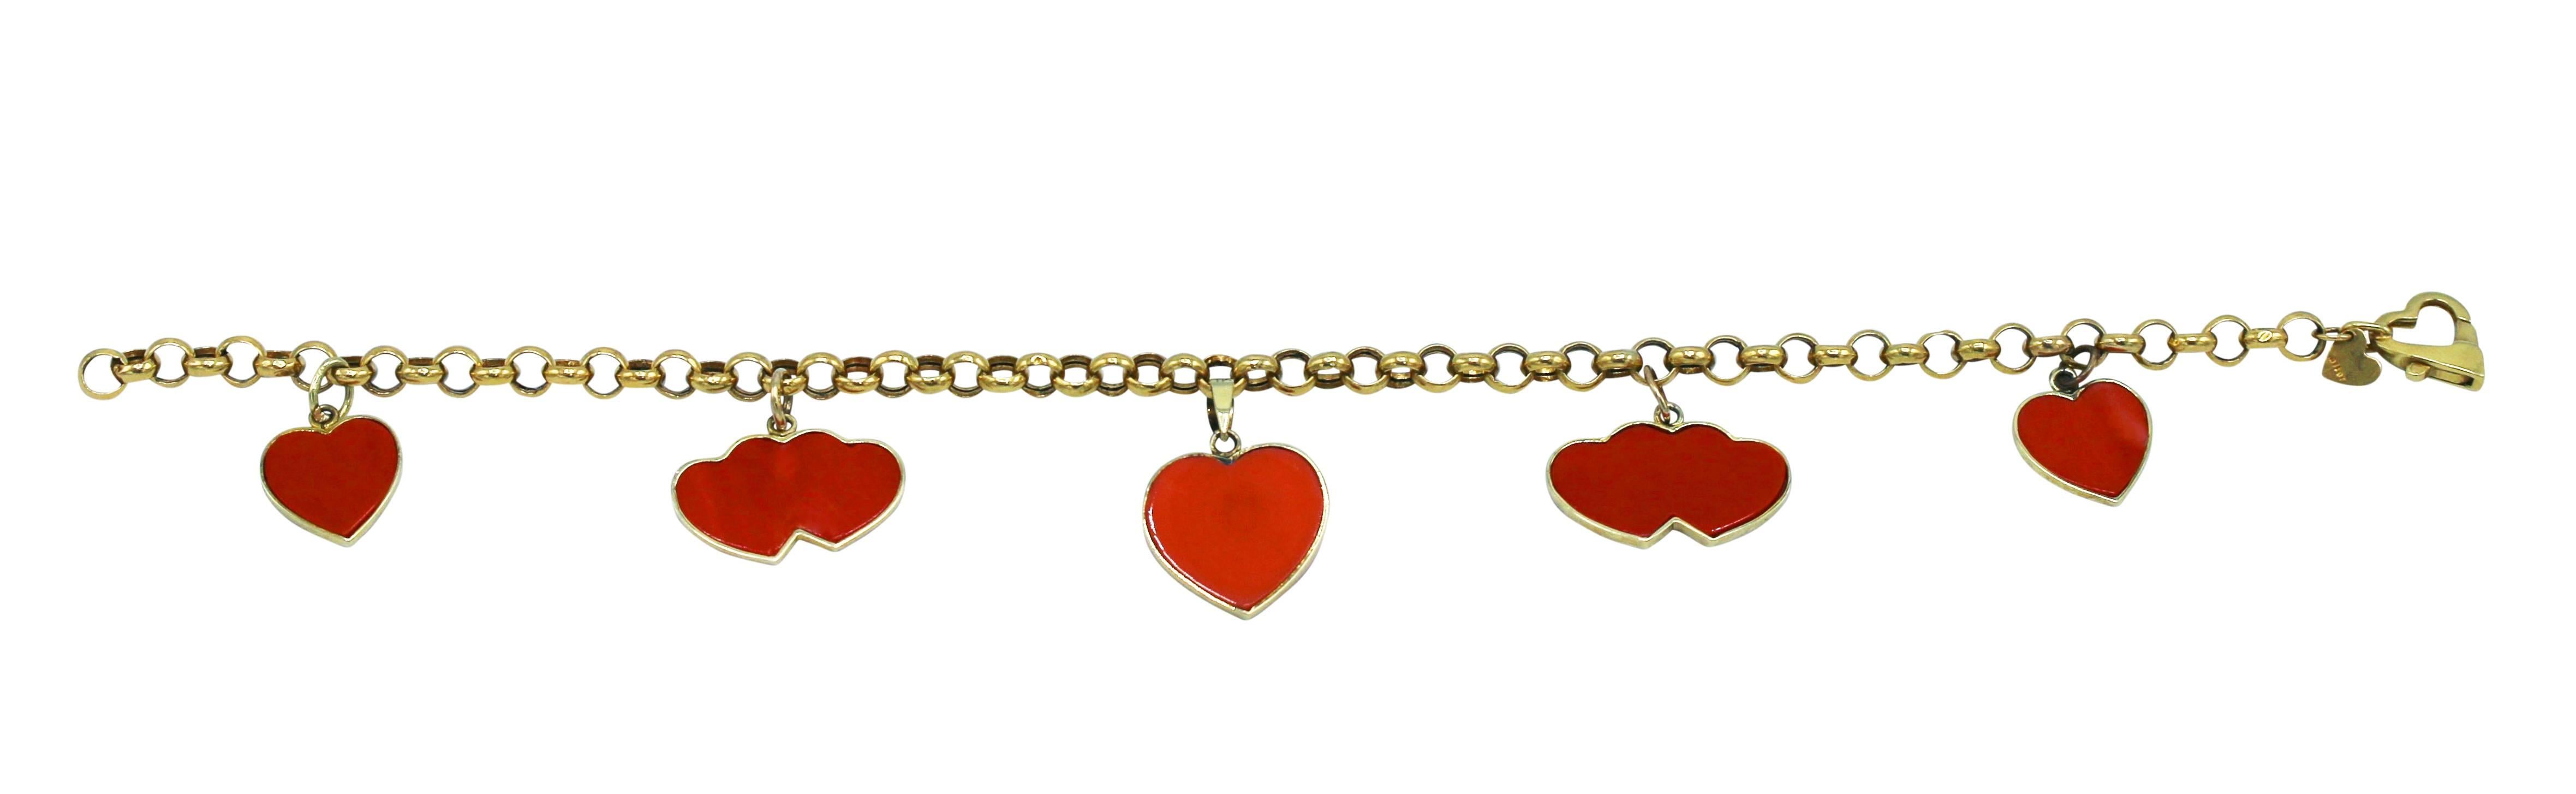 18 karat yellow gold and red coral charm bracelet, circa 1960, set with alternating charms of single heart and double heart charms, the clasp of heart-shape, gross weight 9.6 grams, length 9 inches, width 3/4 inch, an endearing gift  for a special